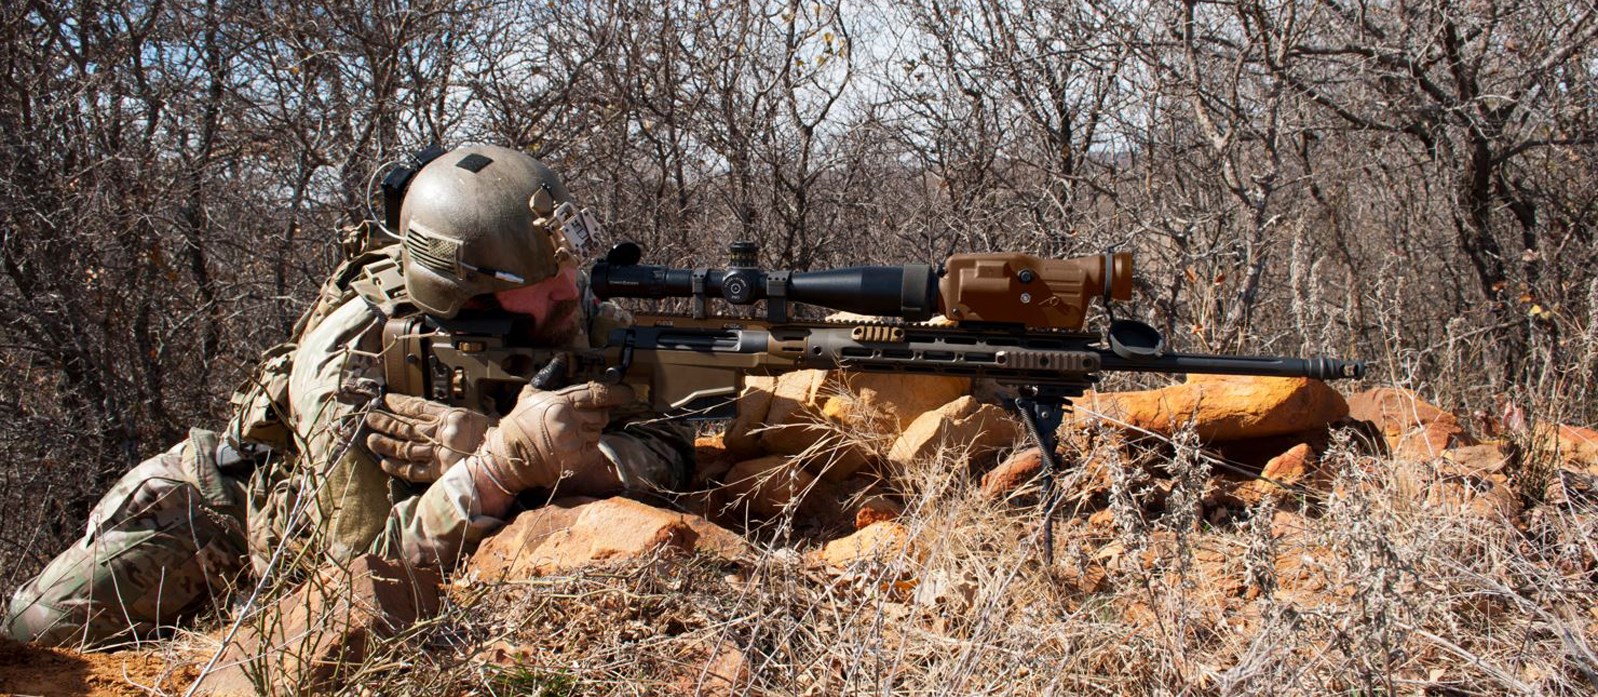 Sniper with advanced infrared weapon sight